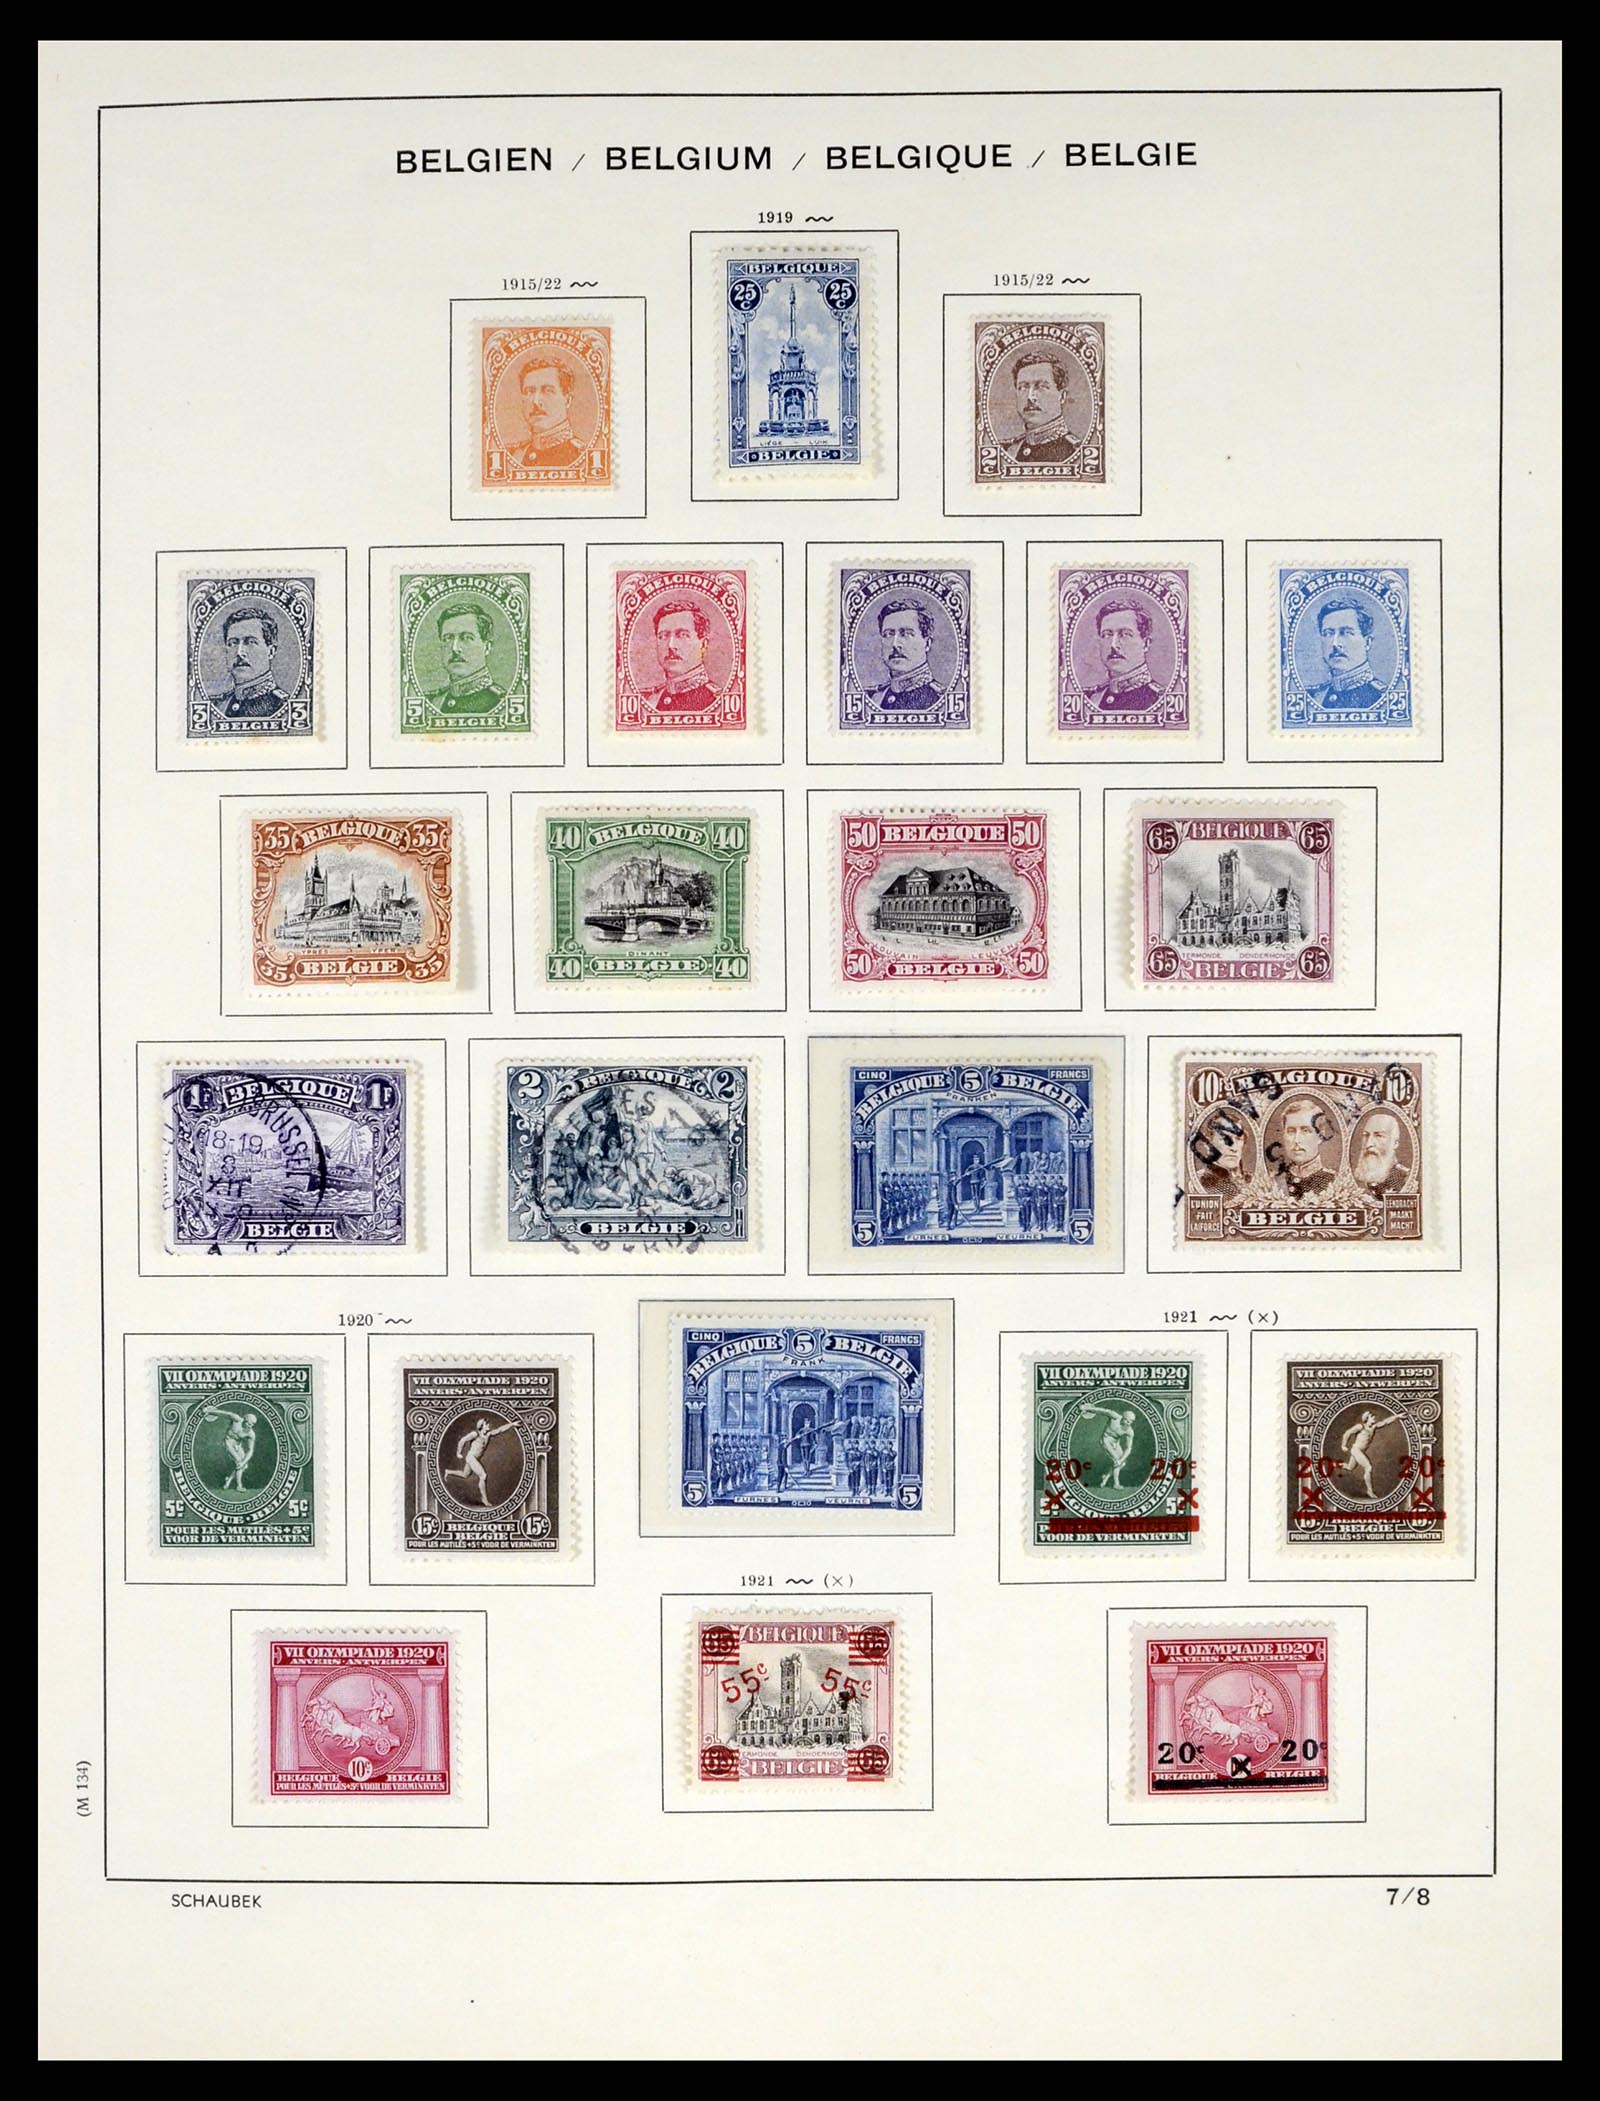 37595 008 - Stamp collection 37595 Super collection Belgium 1849-2015!